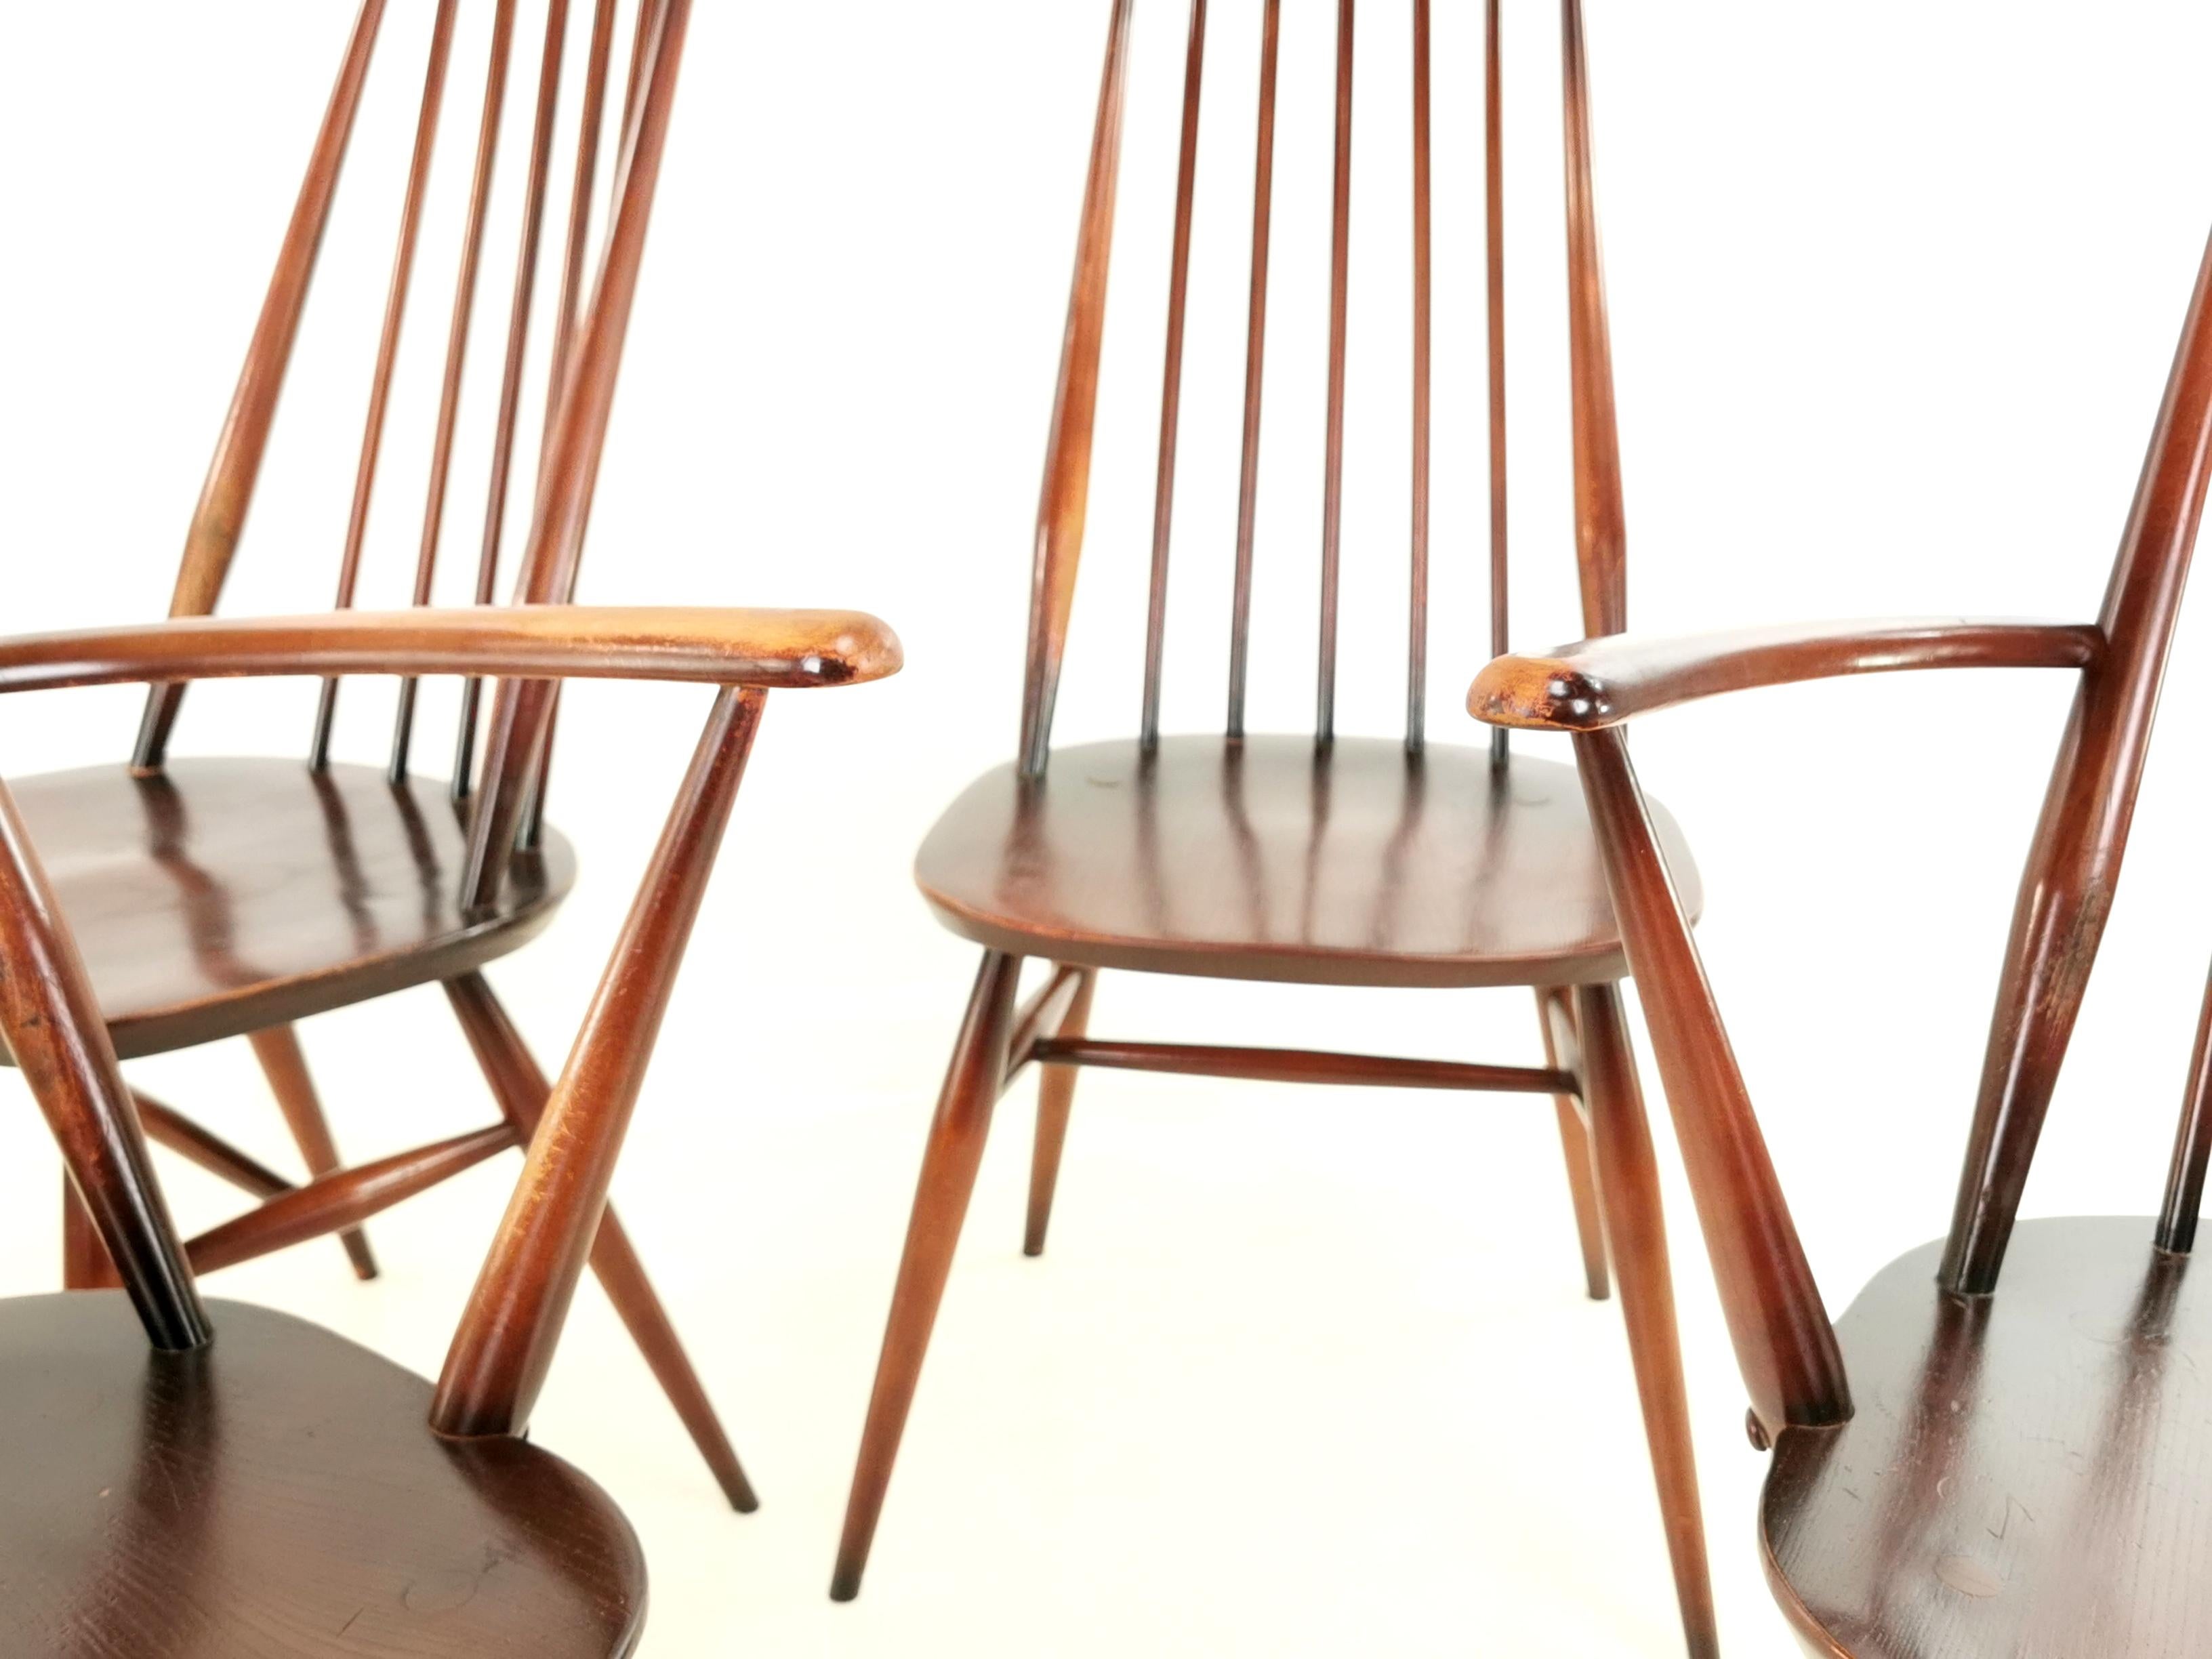 Ercol dining chairs

A set of four high back Goldsmiths chairs including two carvers. Superb conker brown color, with very good patina.

Designed by Lucian Ercolani. 

High quality chairs and made with elm and beechwood,

circa 1960s.